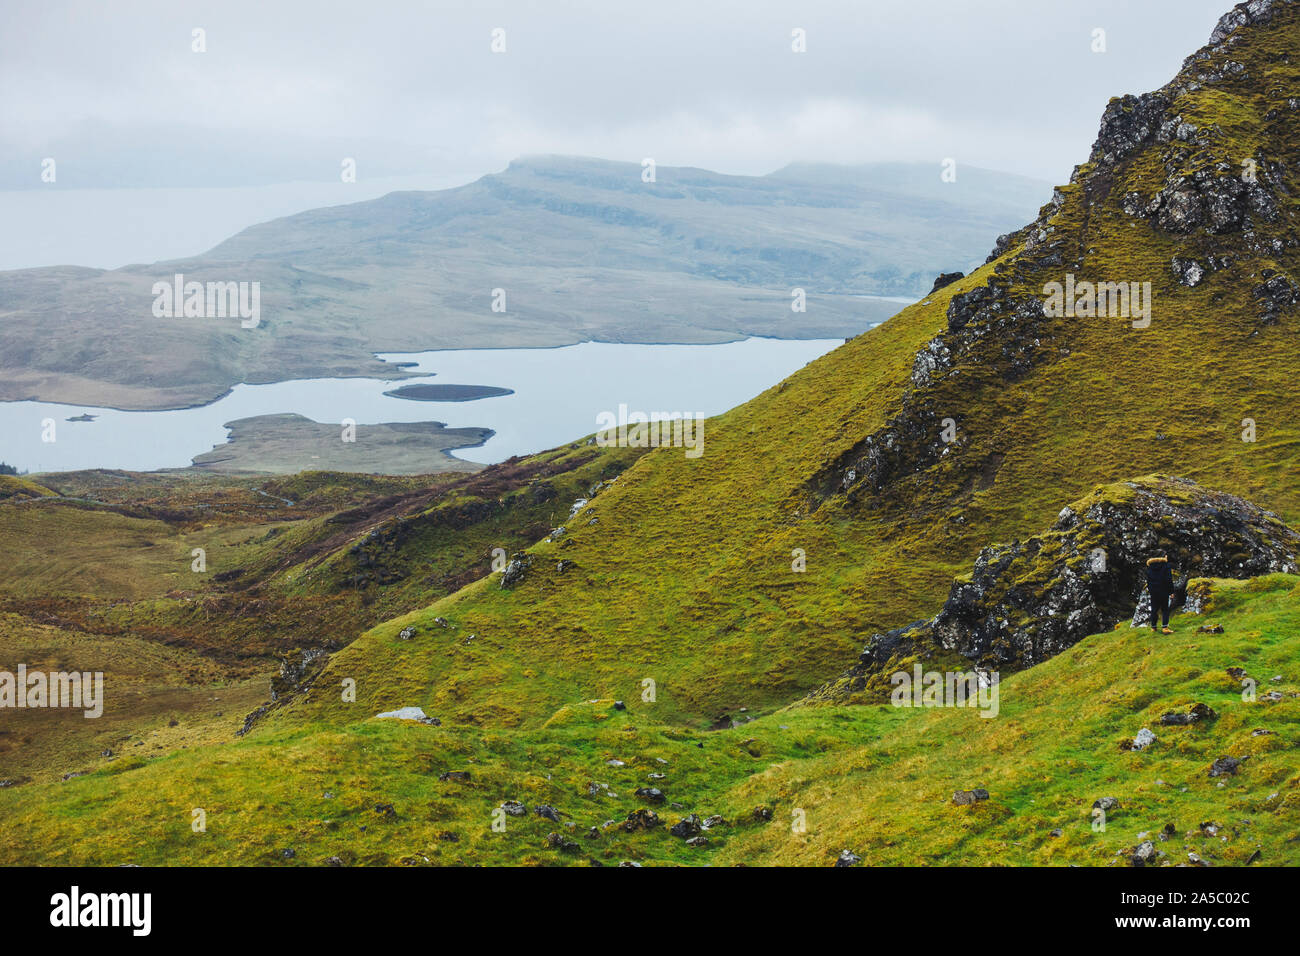 A grey, rainy, cloudy day at the Old Man of Storr, a famous rock formation on the Isle of Skye, Scotland Stock Photo